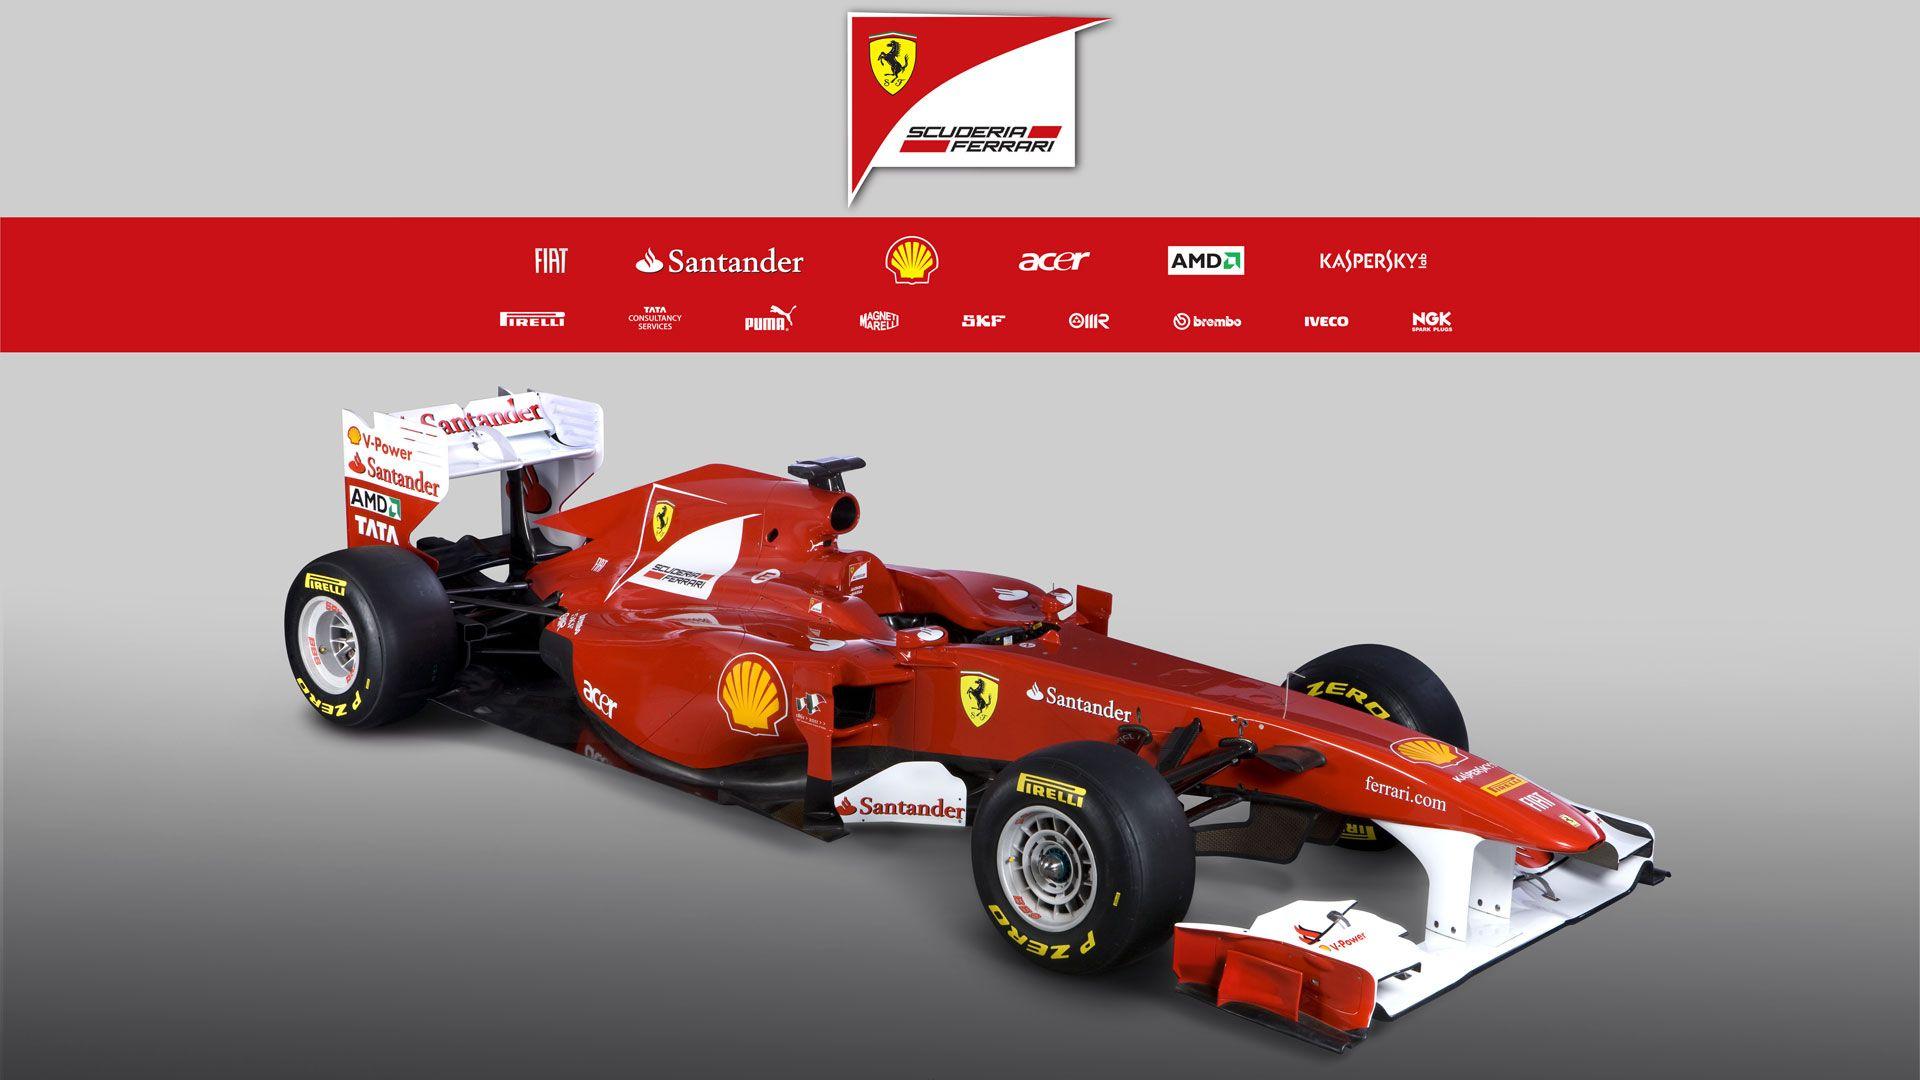 HD Wallpapers 2011 F1 Car Launches